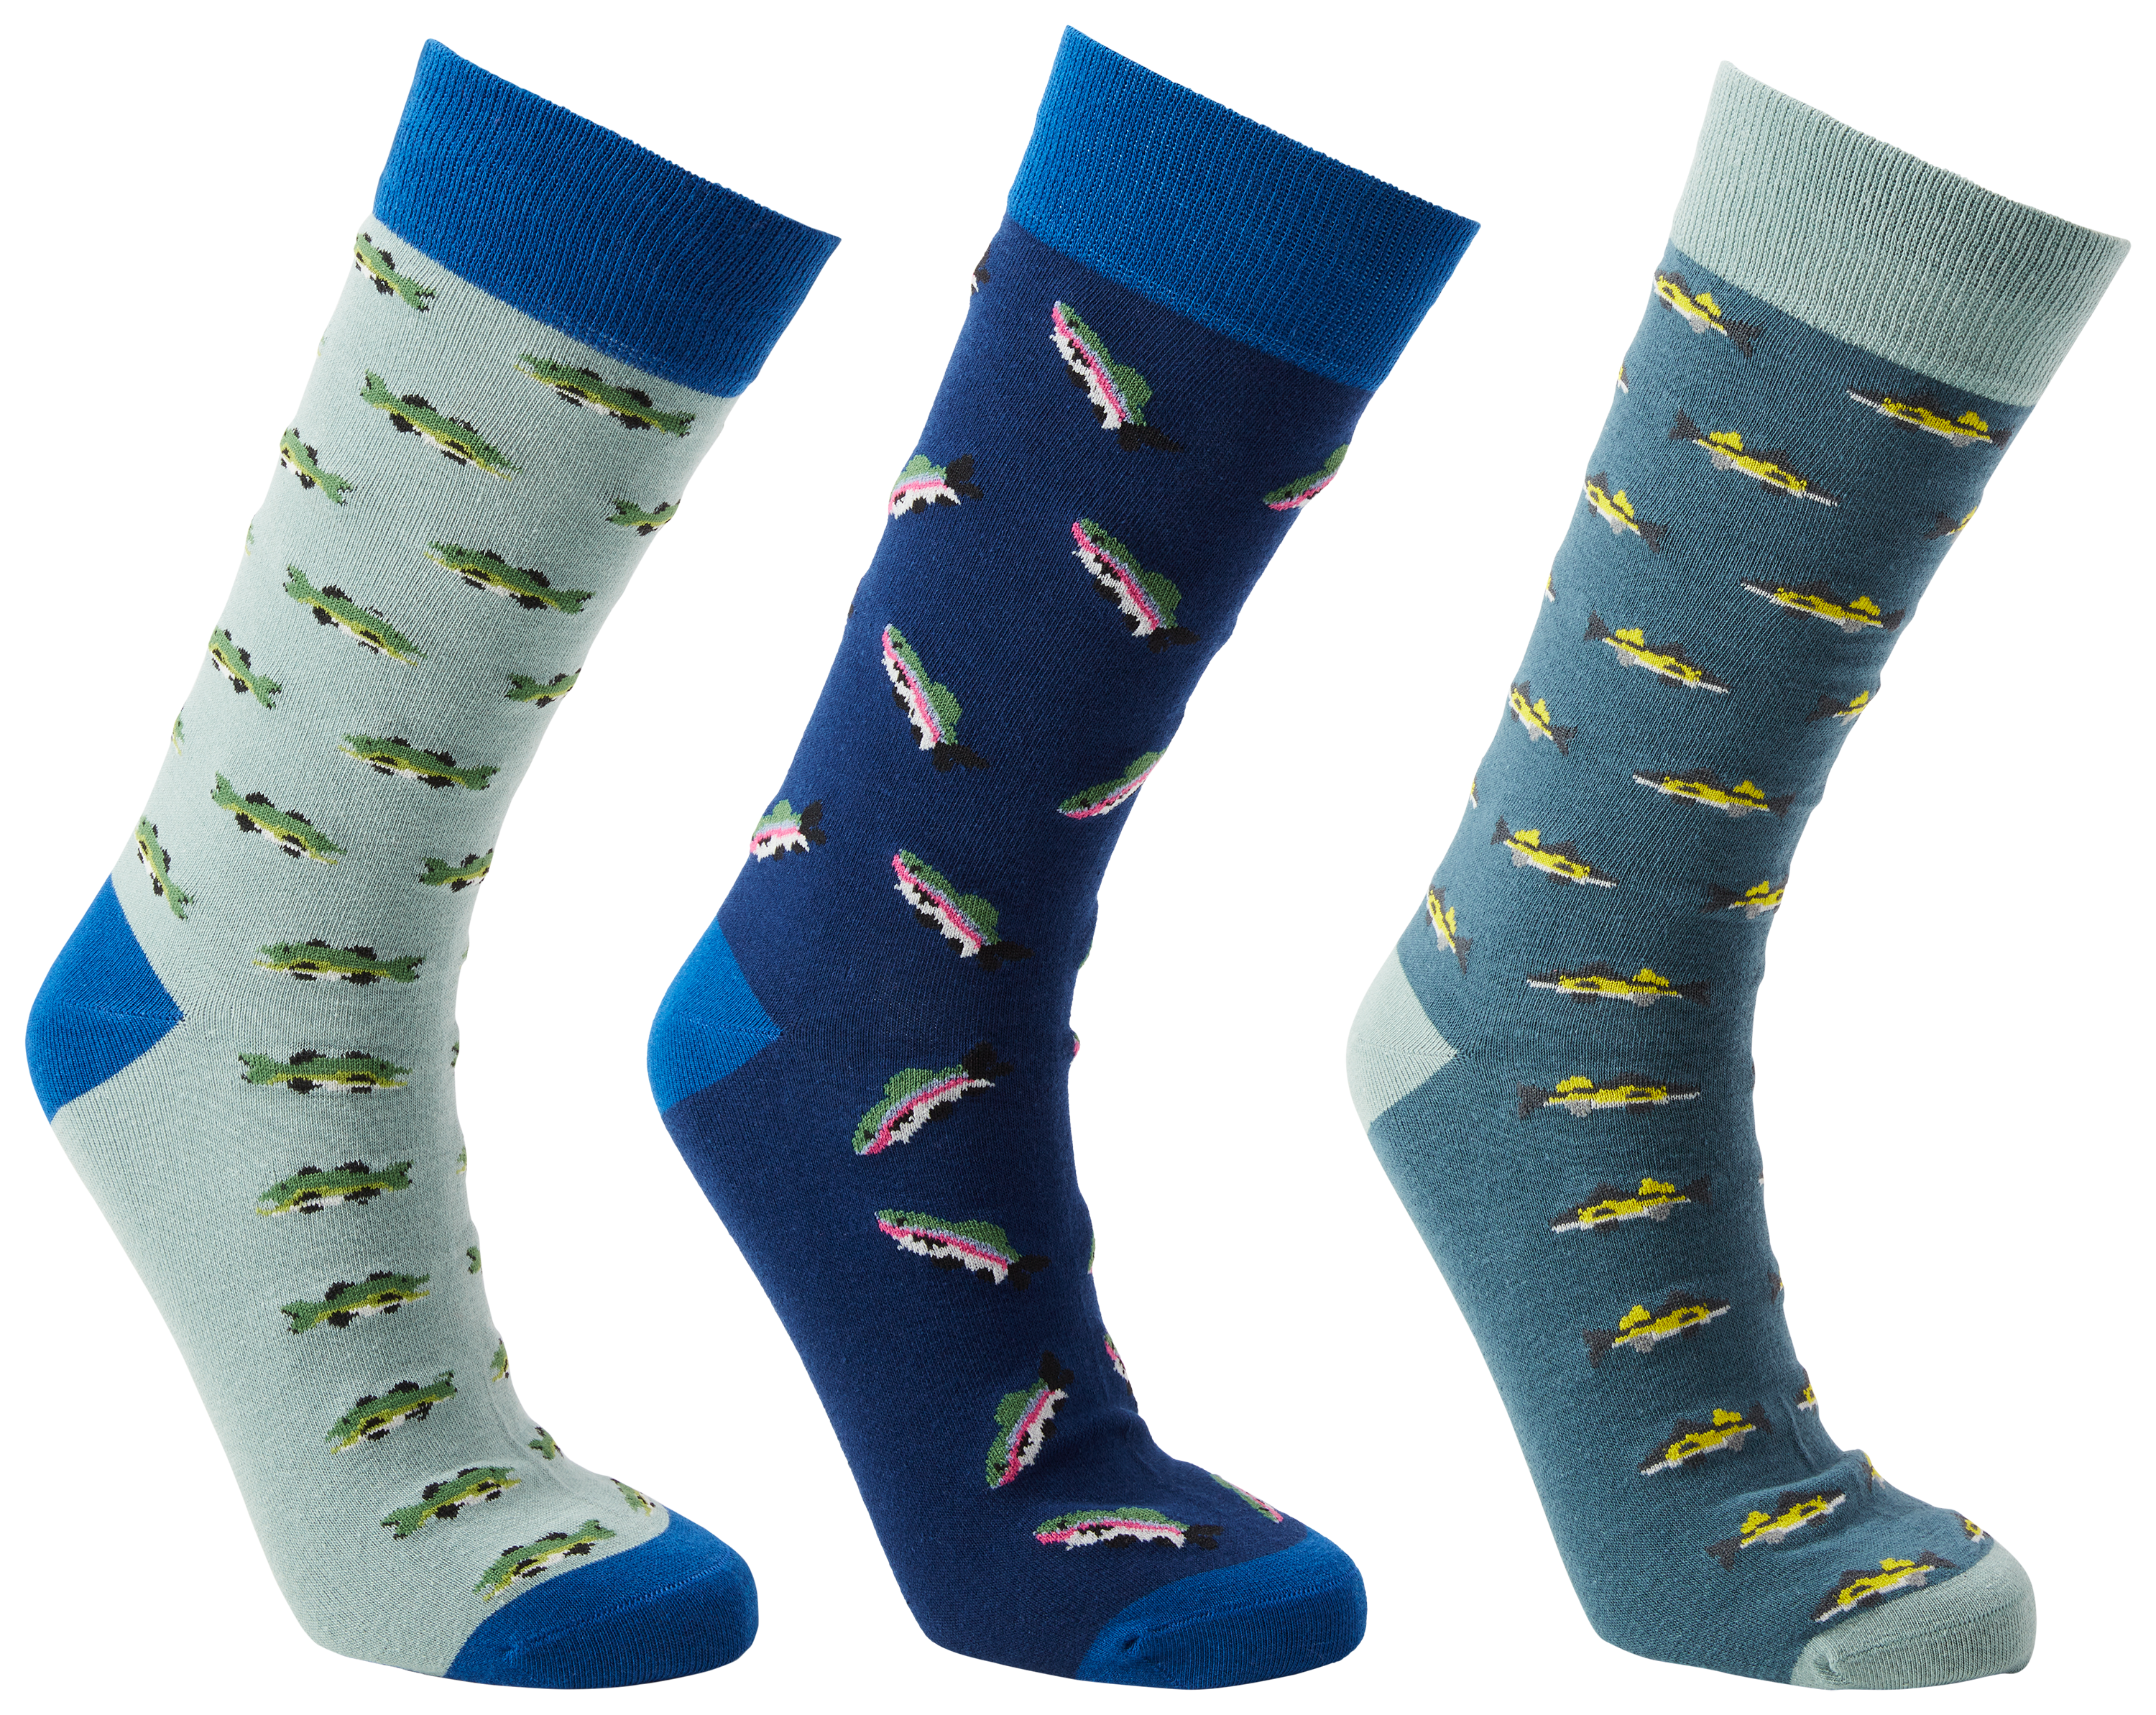 Exciting Personalised Socks for Fishermen